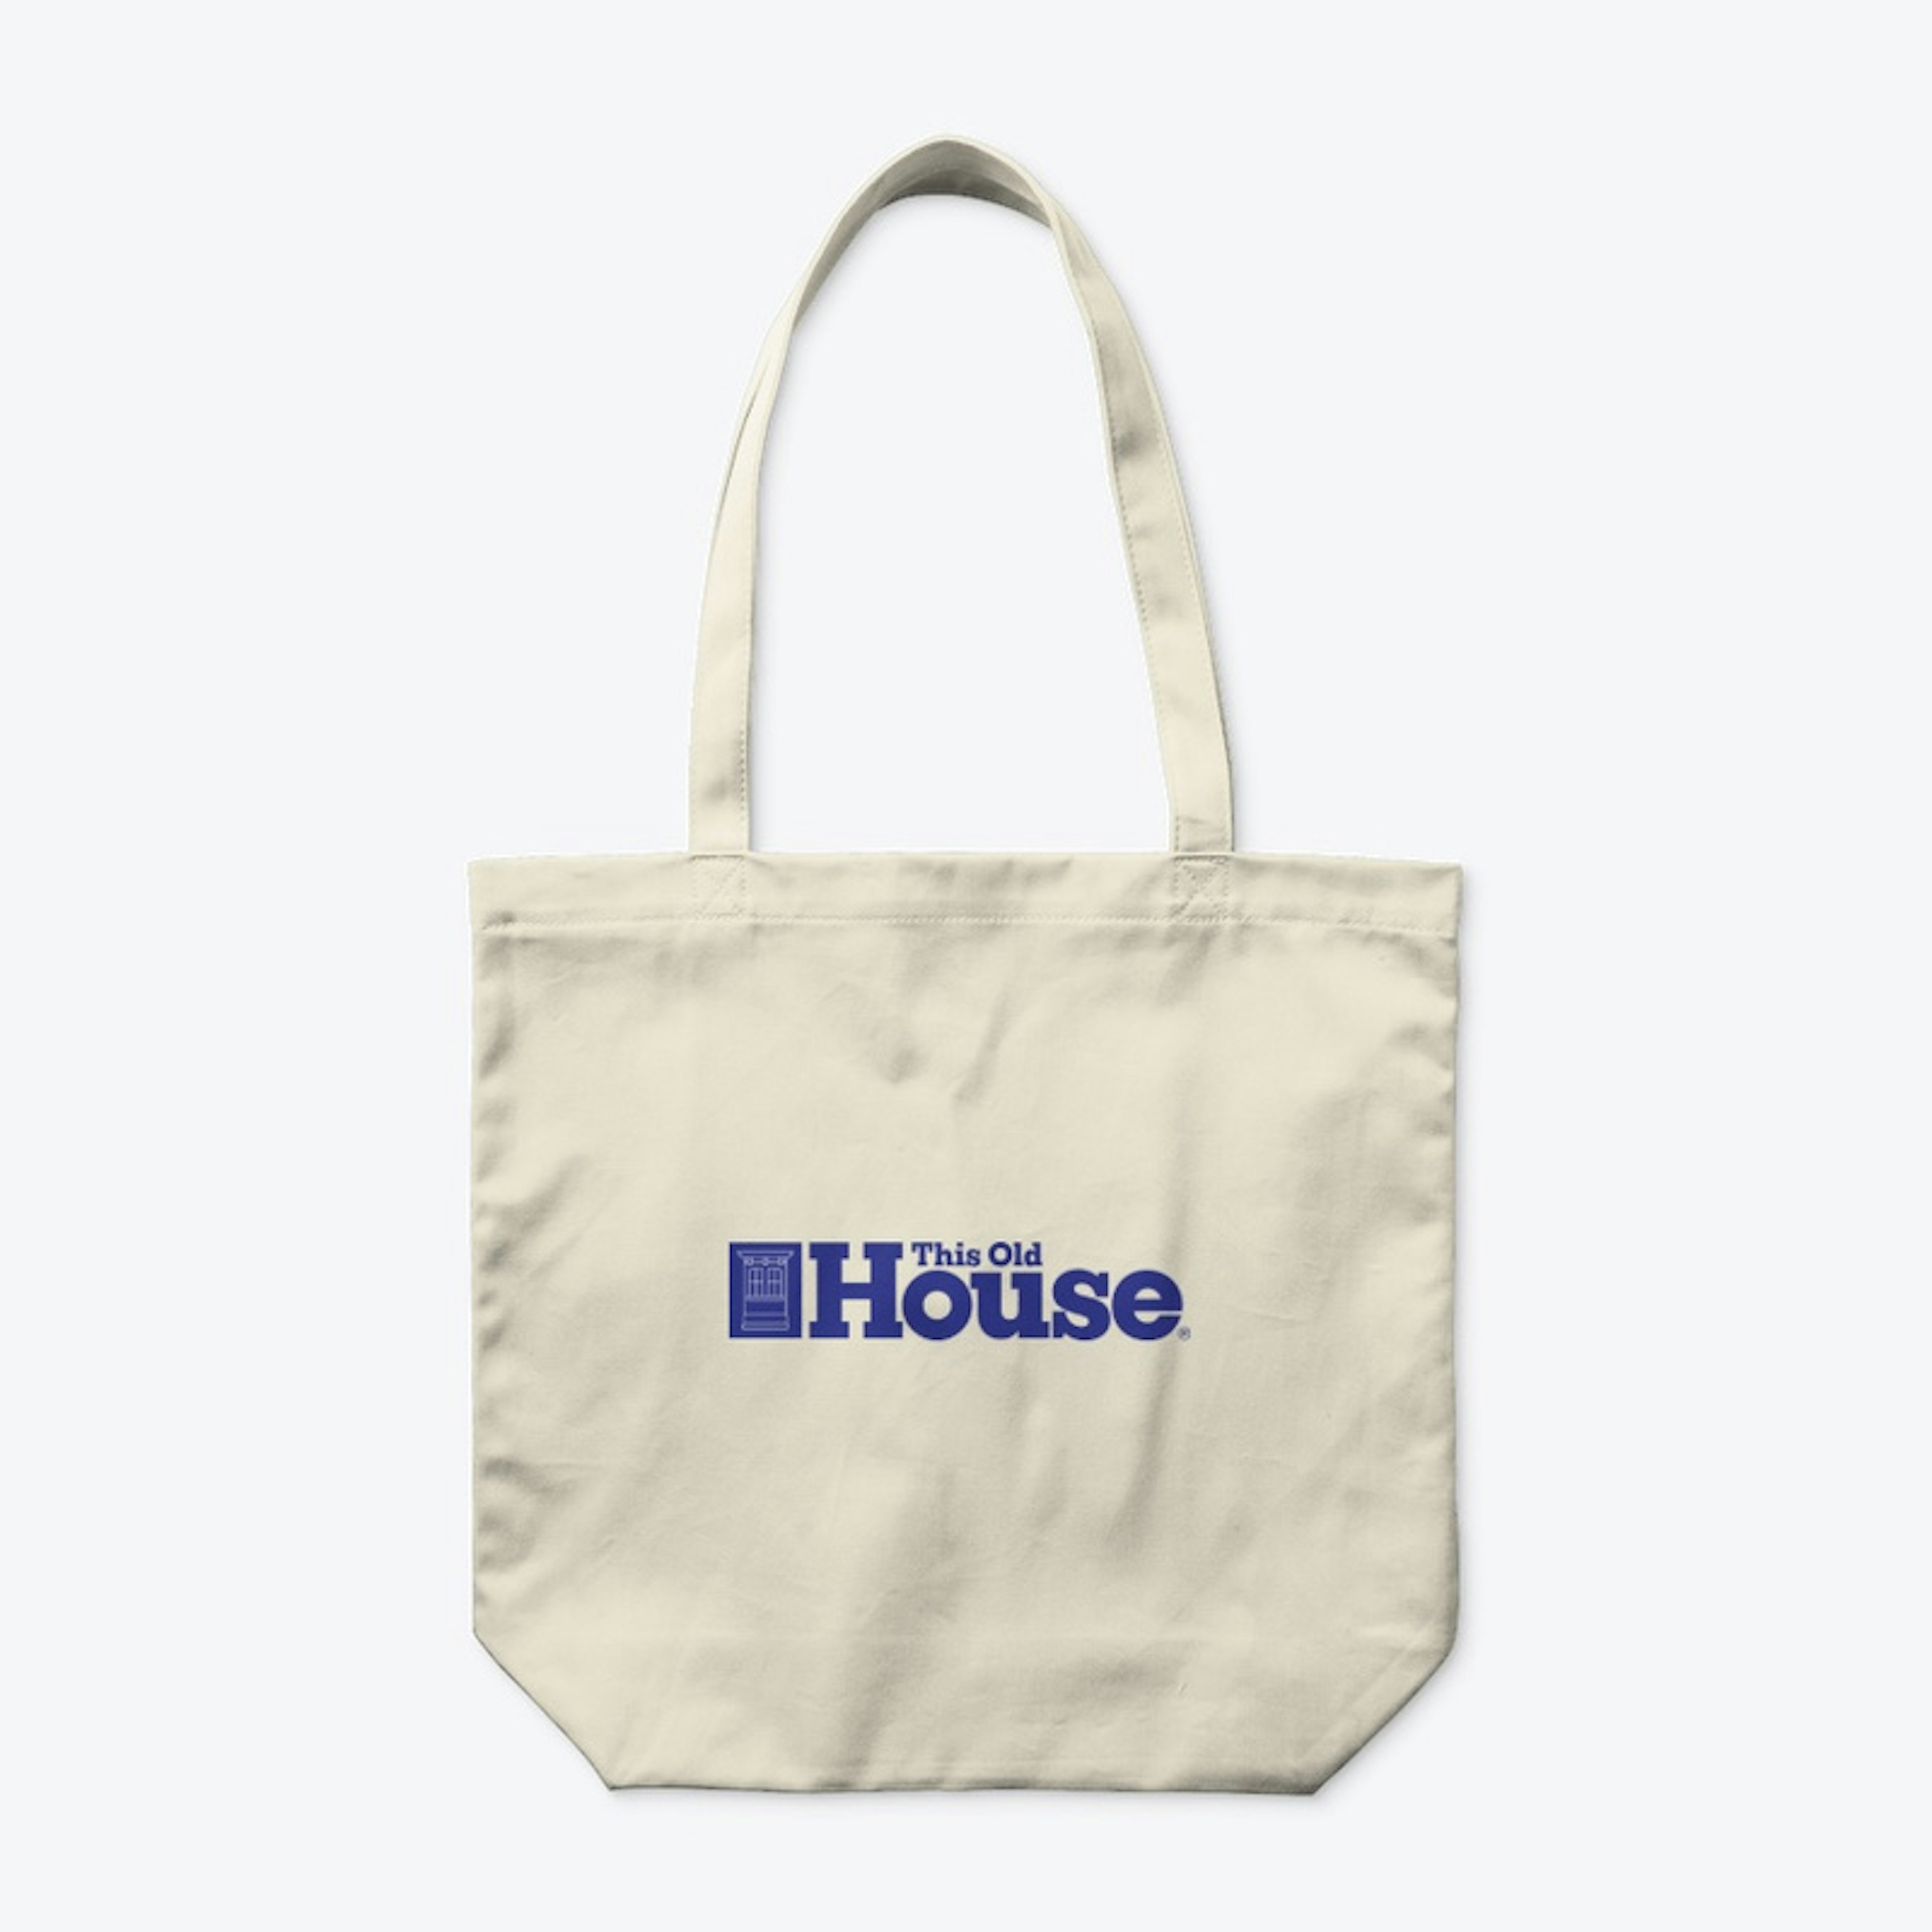 This Old House Tote Bag